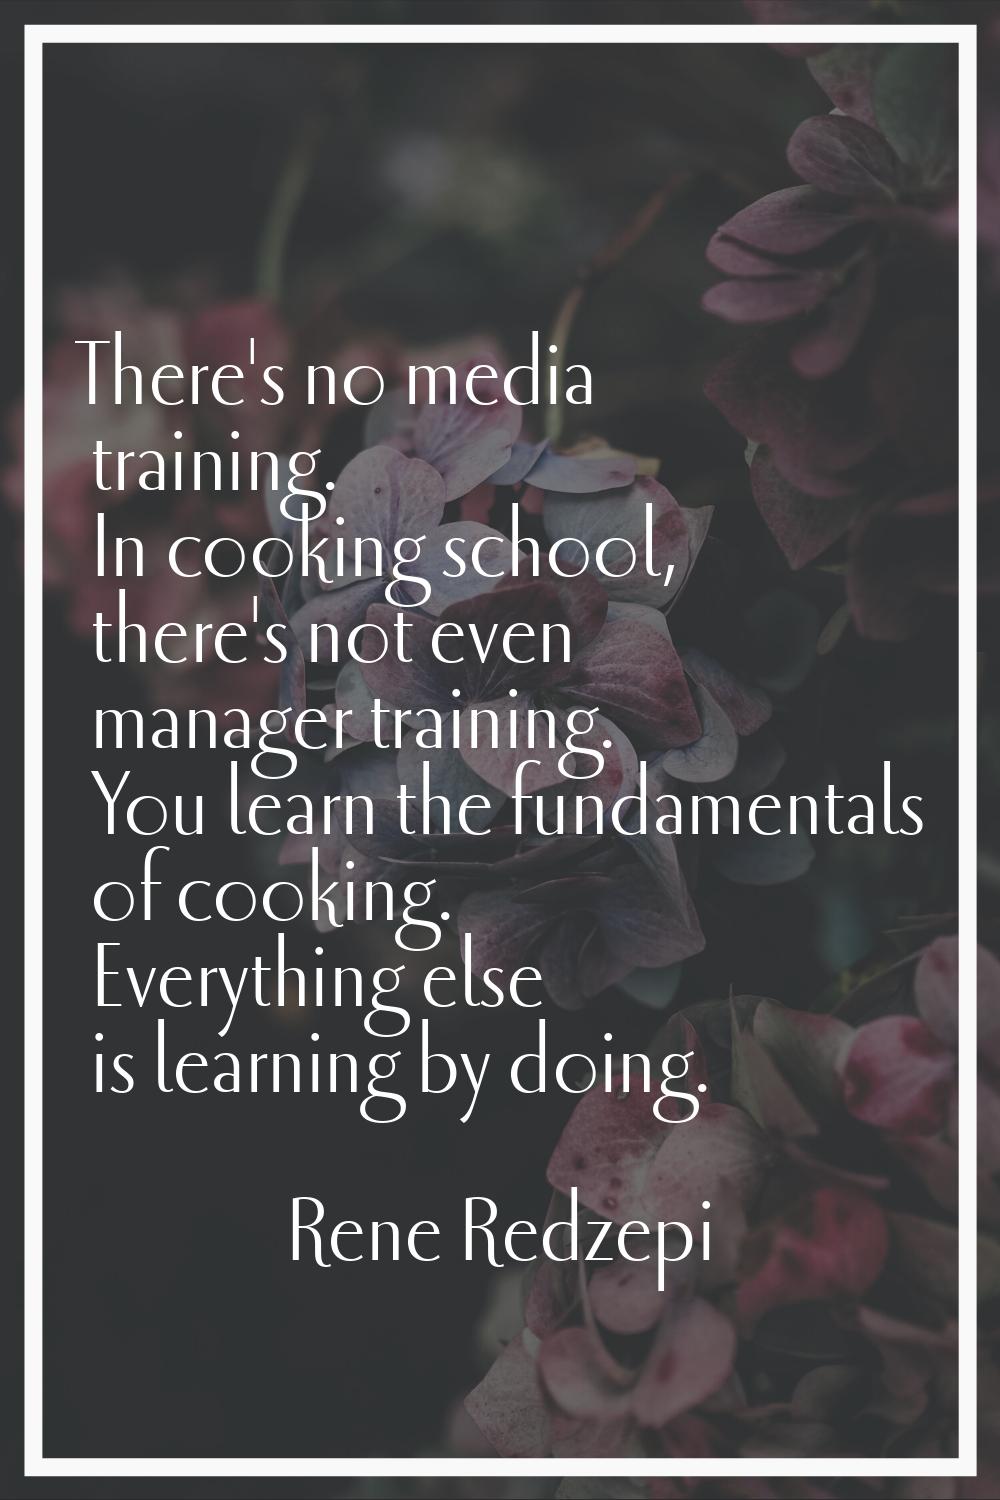 There's no media training. In cooking school, there's not even manager training. You learn the fund